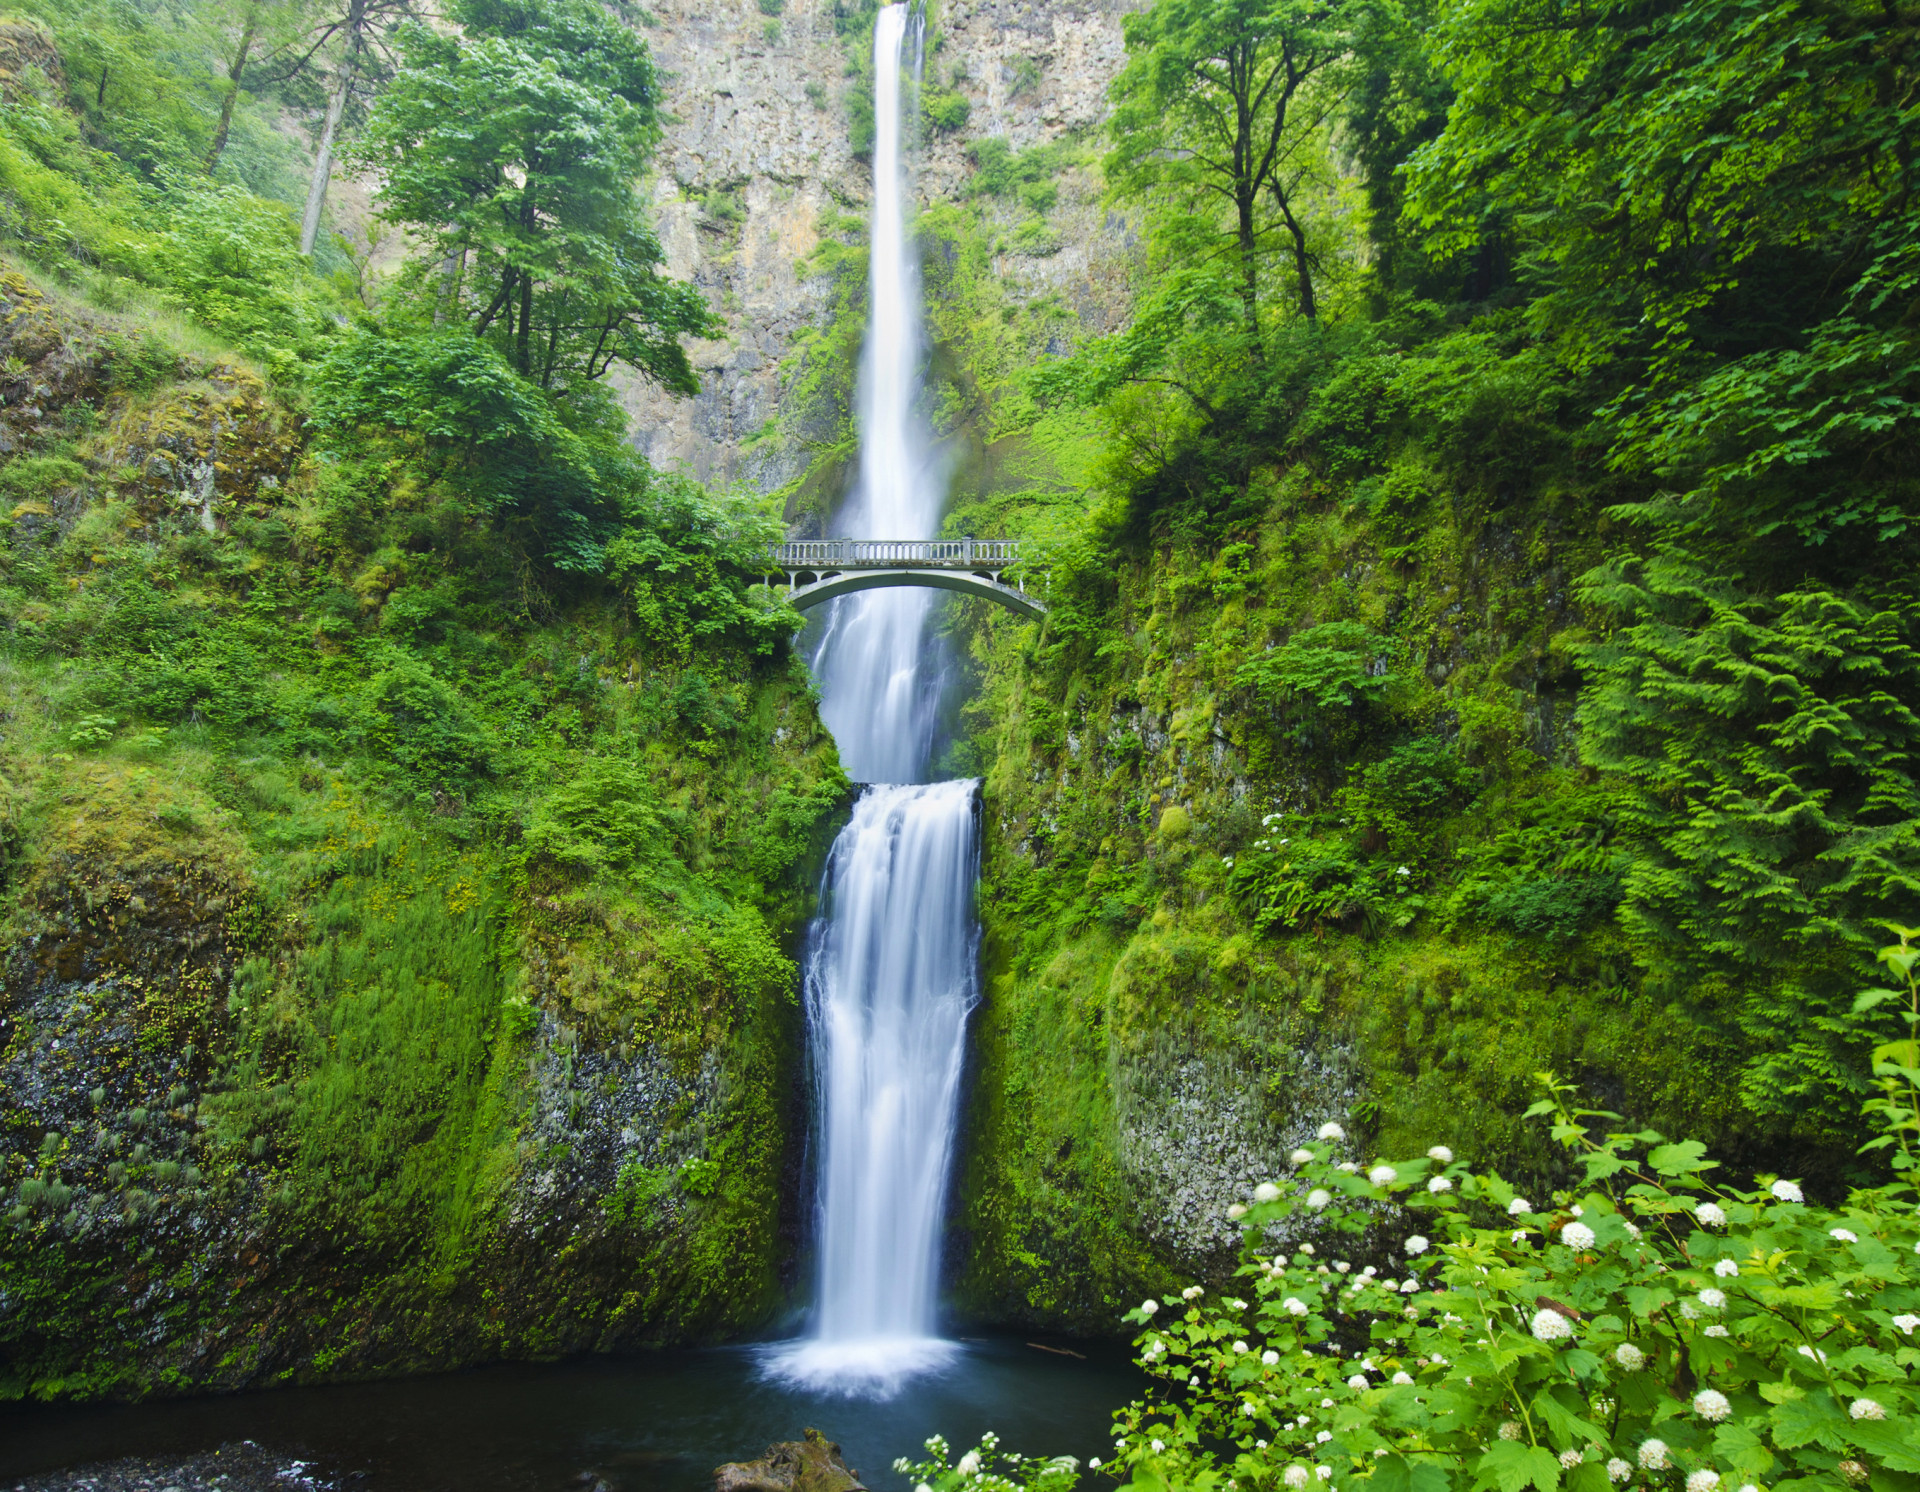 If this waterfall isn't the living manifestation of what dreams are made of, then what is? Otherwise known as Bridal Falls, this colossal cascade is the tallest in all of Oregon, at a height of 620 ft.<p><a href="https://www.msn.com/en-us/community/channel/vid-7xx8mnucu55yw63we9va2gwr7uihbxwc68fxqp25x6tg4ftibpra?cvid=94631541bc0f4f89bfd59158d696ad7e">Follow us and access great exclusive content every day</a></p>